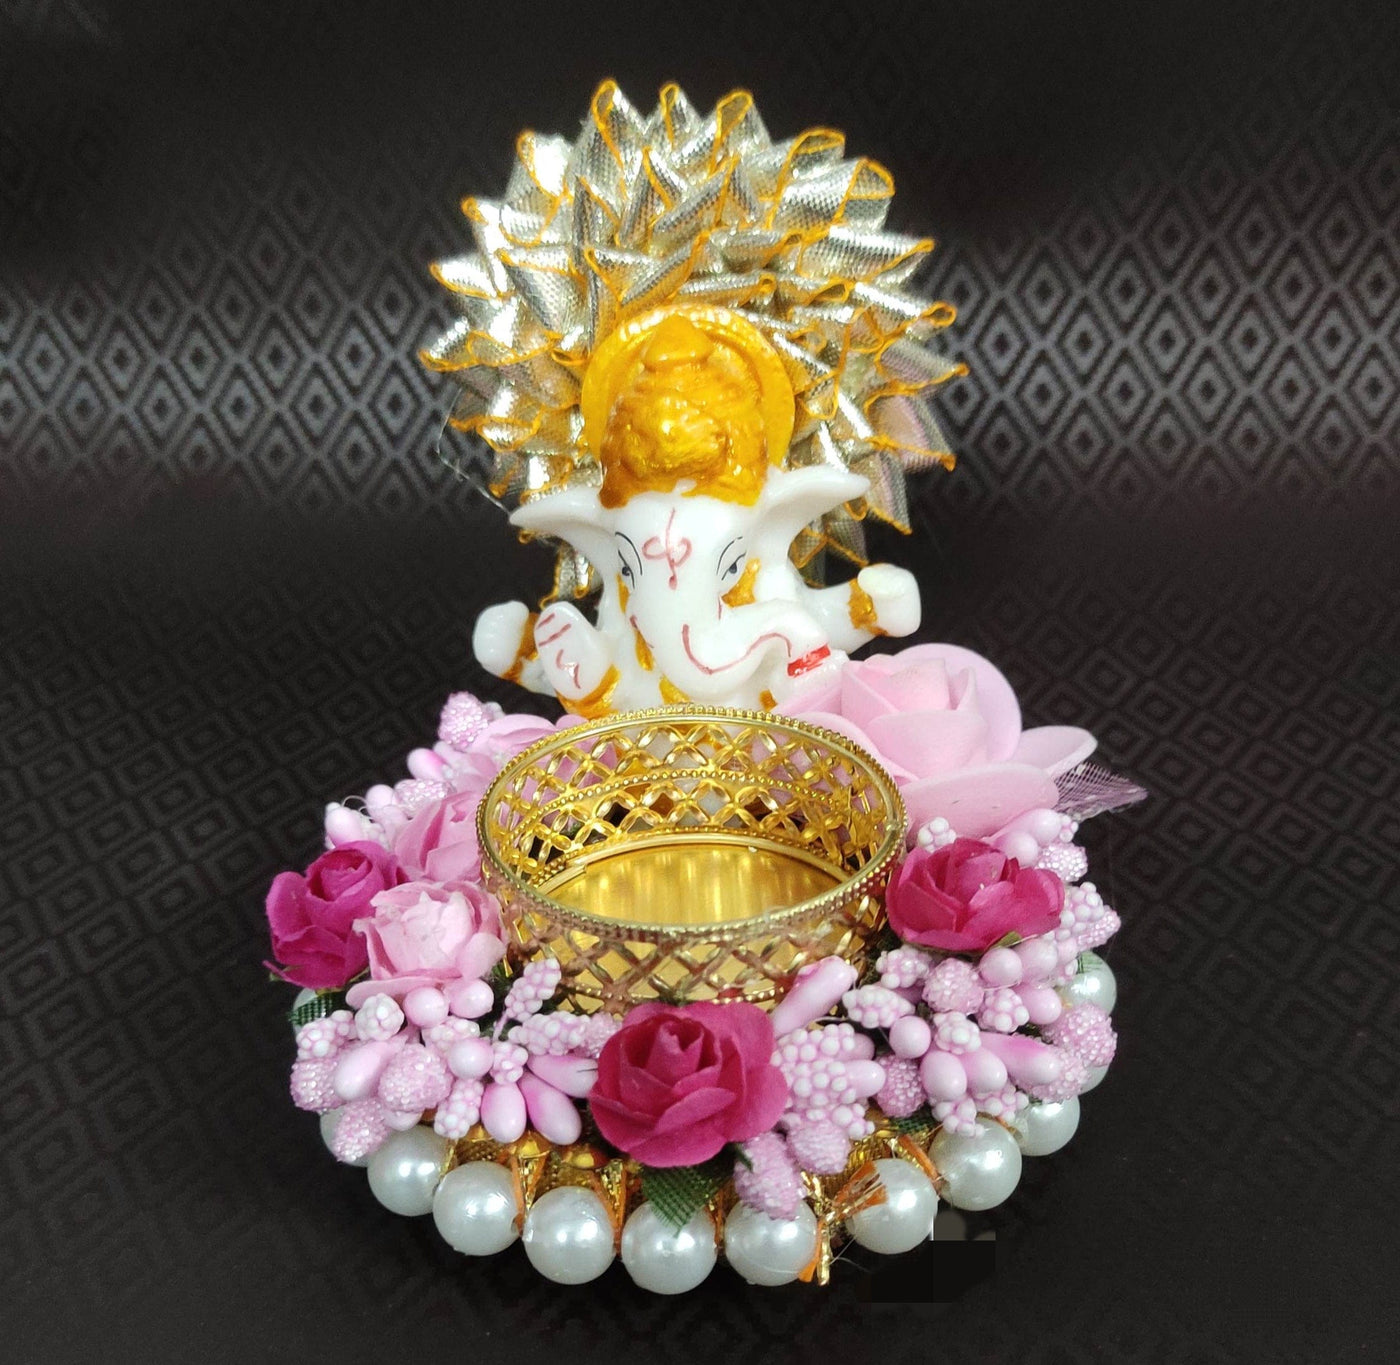 Lamansh ganesh ji candle holder Ganesha Decorative Candle🕯Holder with Artificial Flowers 🌸 & Gota Patti | Diya Stand for Ganesh Chaturthi 🕉 (Tealight Candle Included)